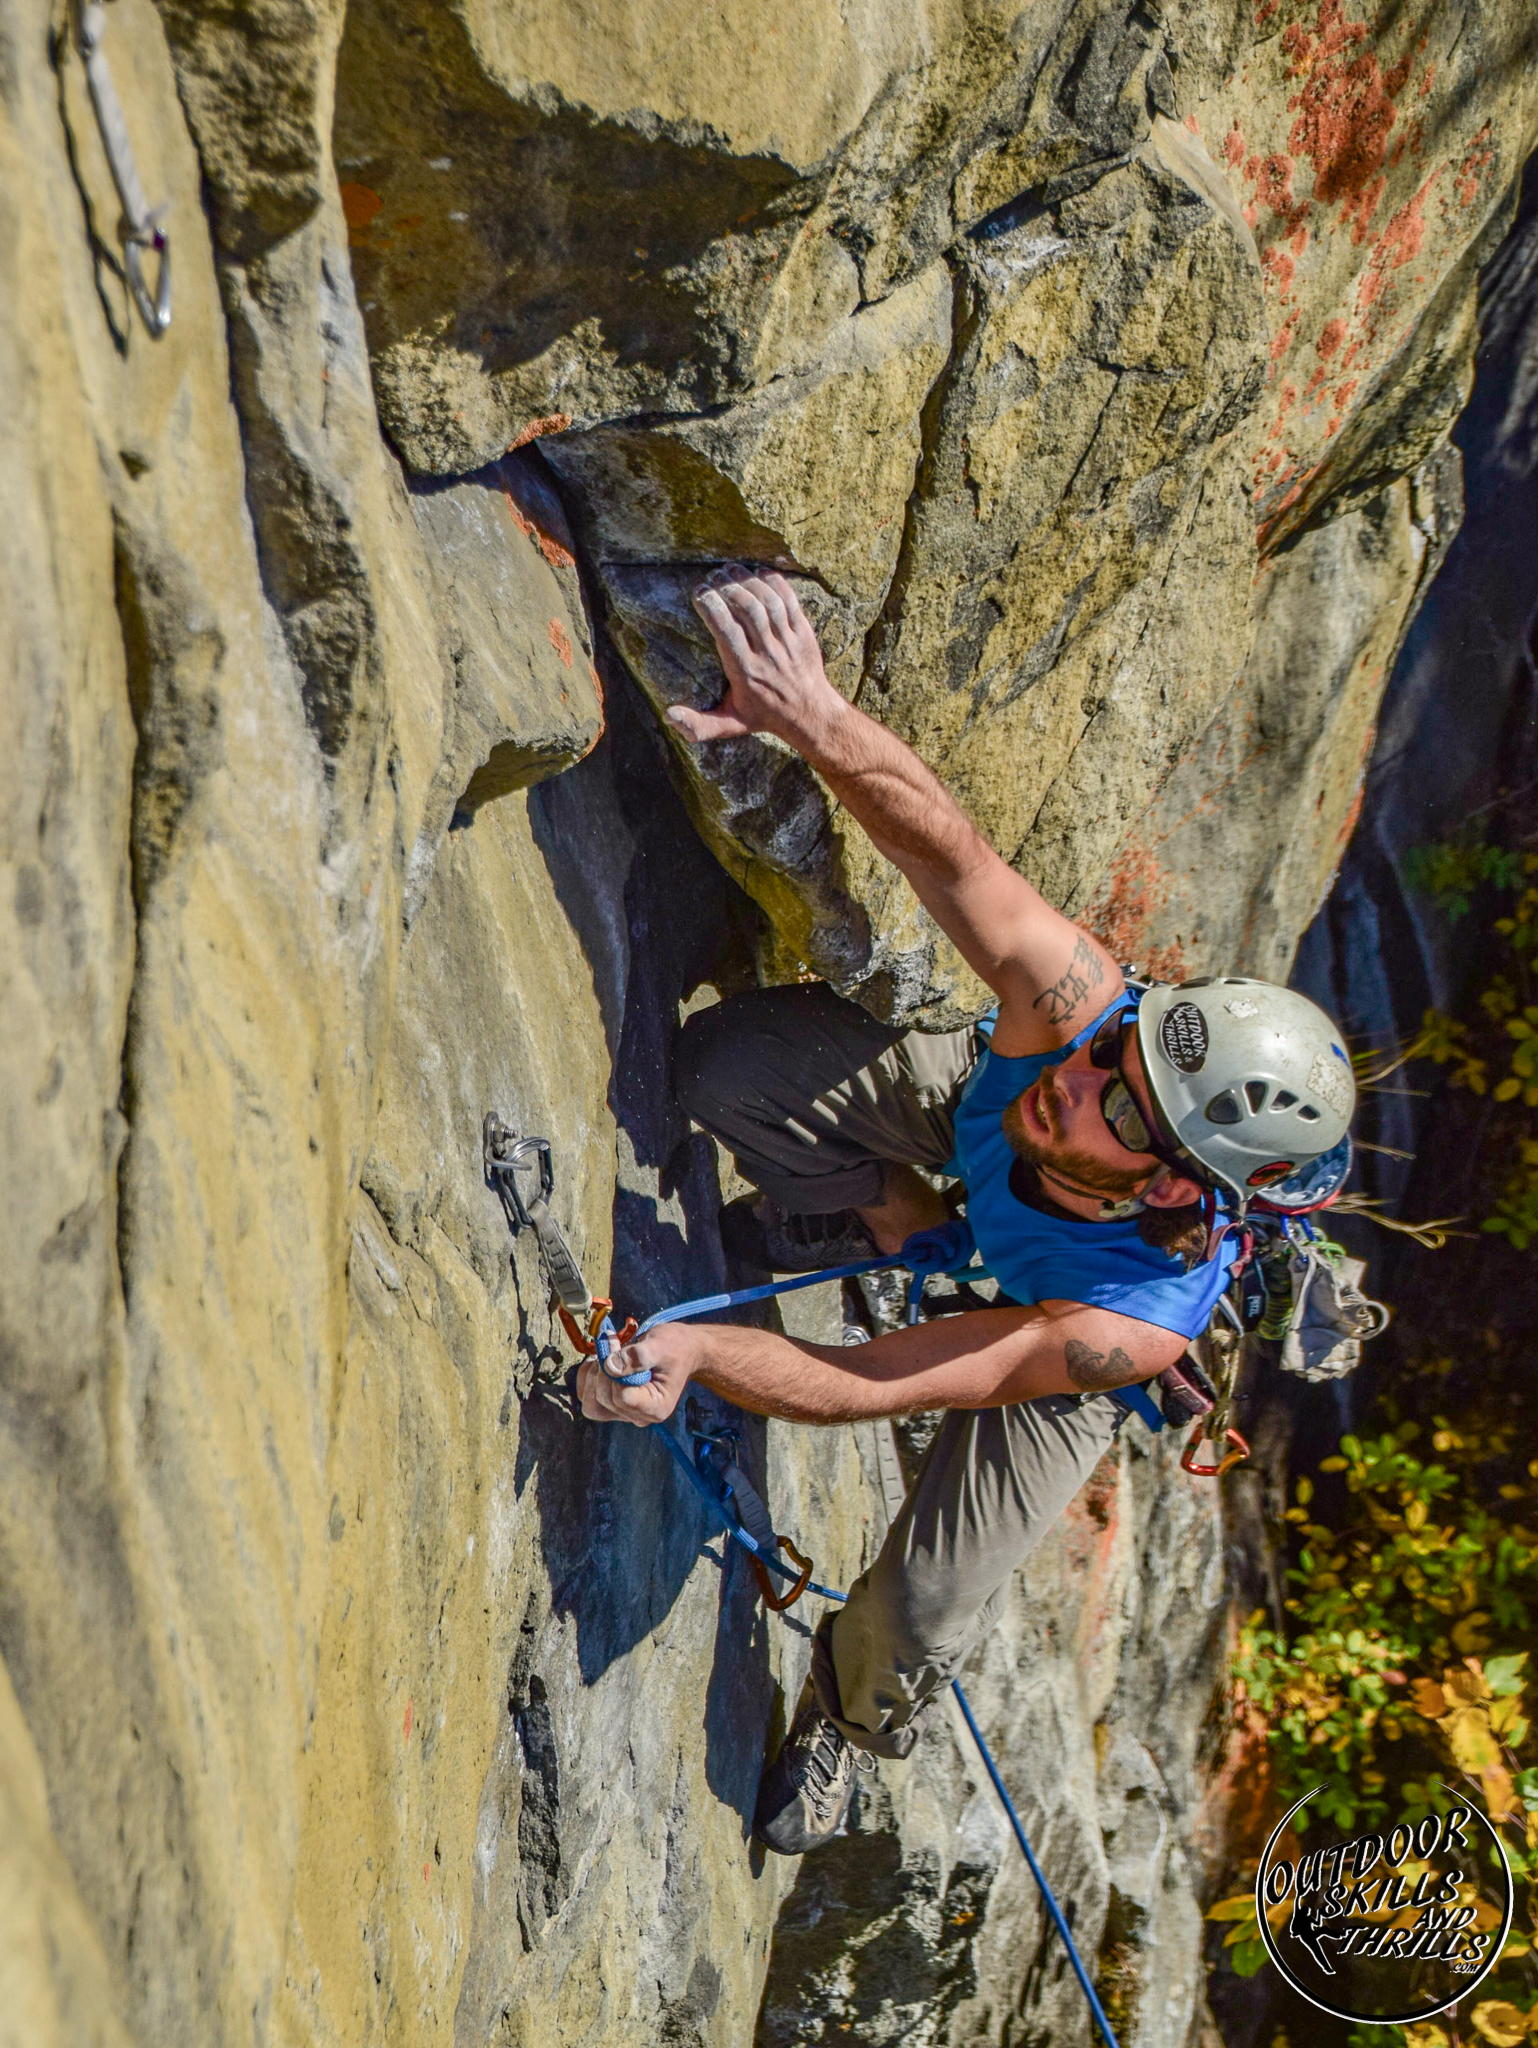 Learn to Lead Sport: Skills for Indoor and Outdoor Lead Climbing